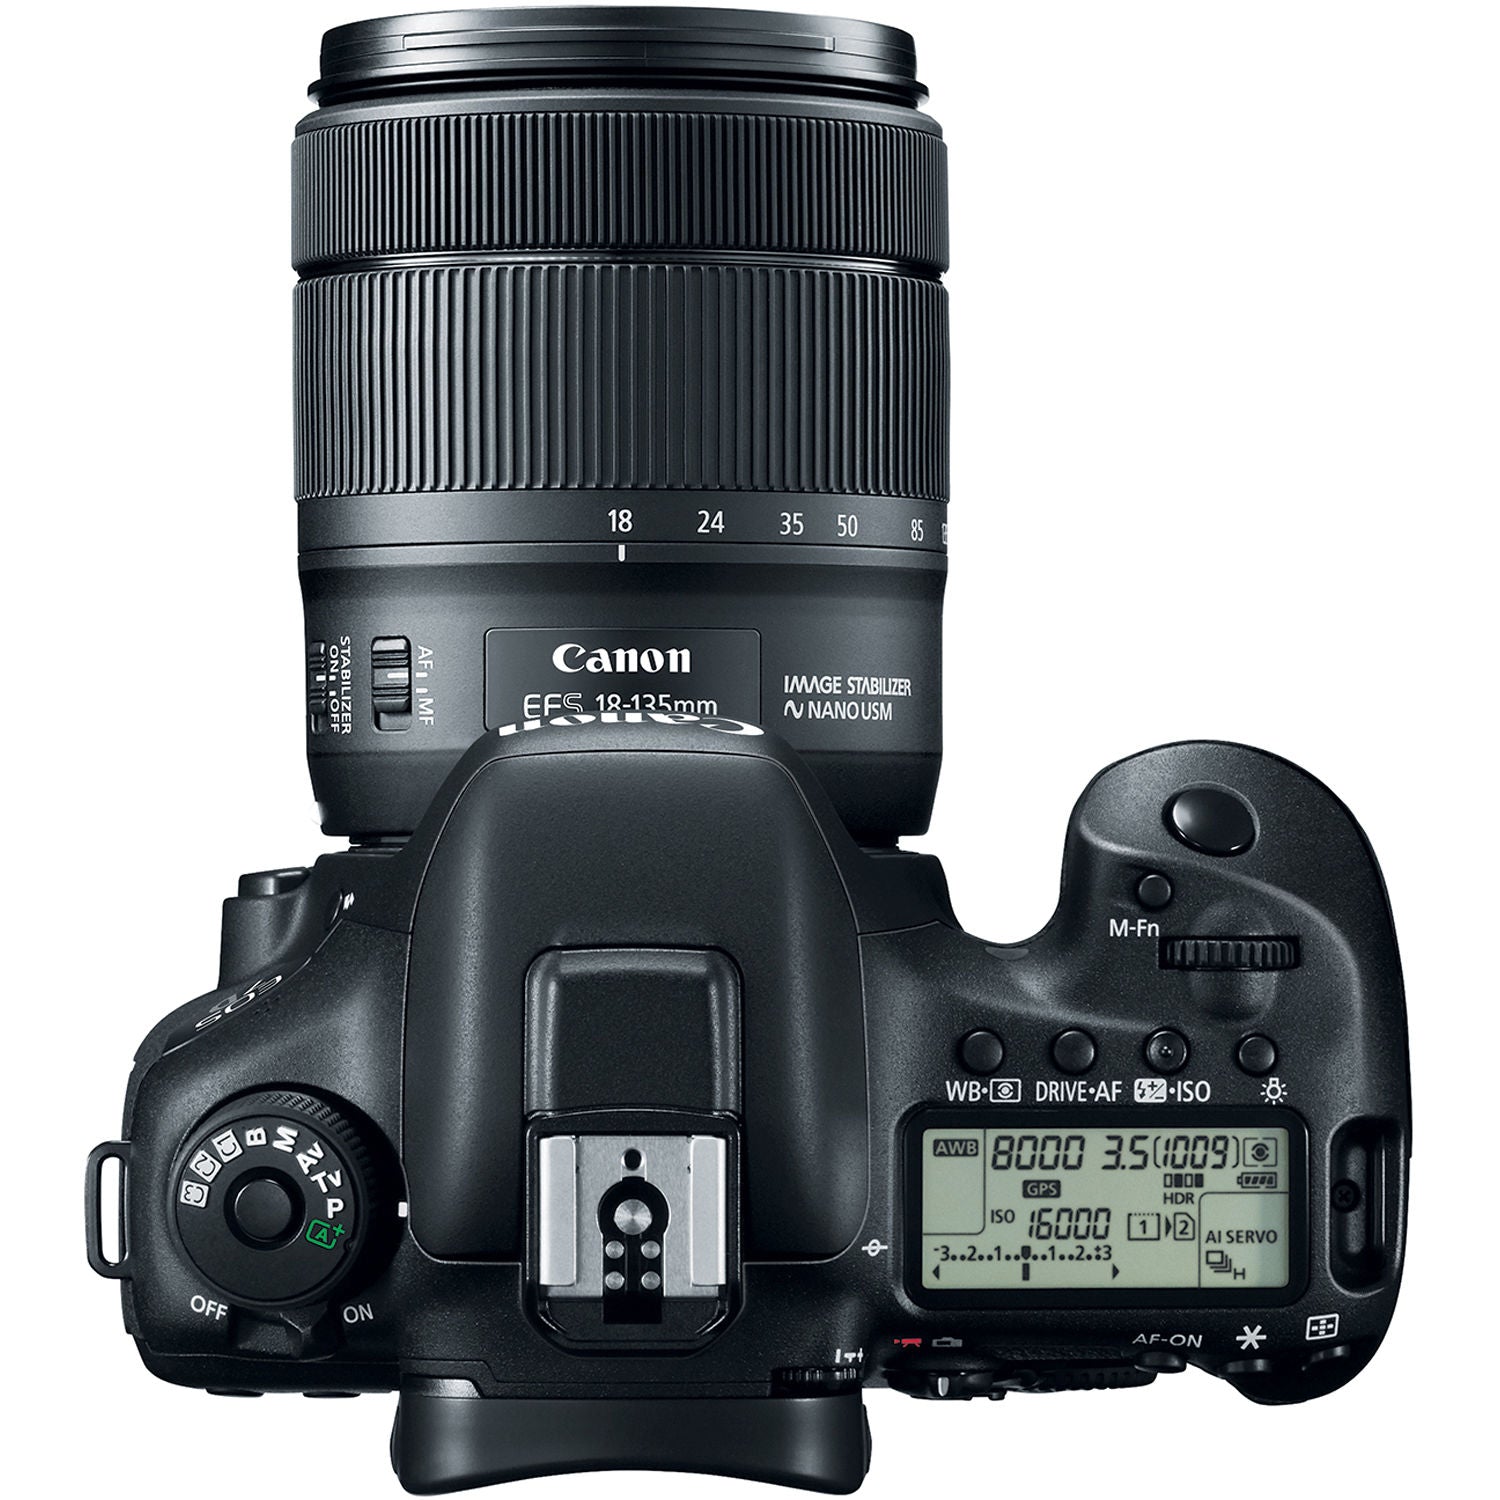 Canon EOS 7D Mark II DSLR Camera (Intl Model) w/ 18-135mm Lens & W-E1 Wi-Fi Adapter With Memory Card Kit, Filter Kit